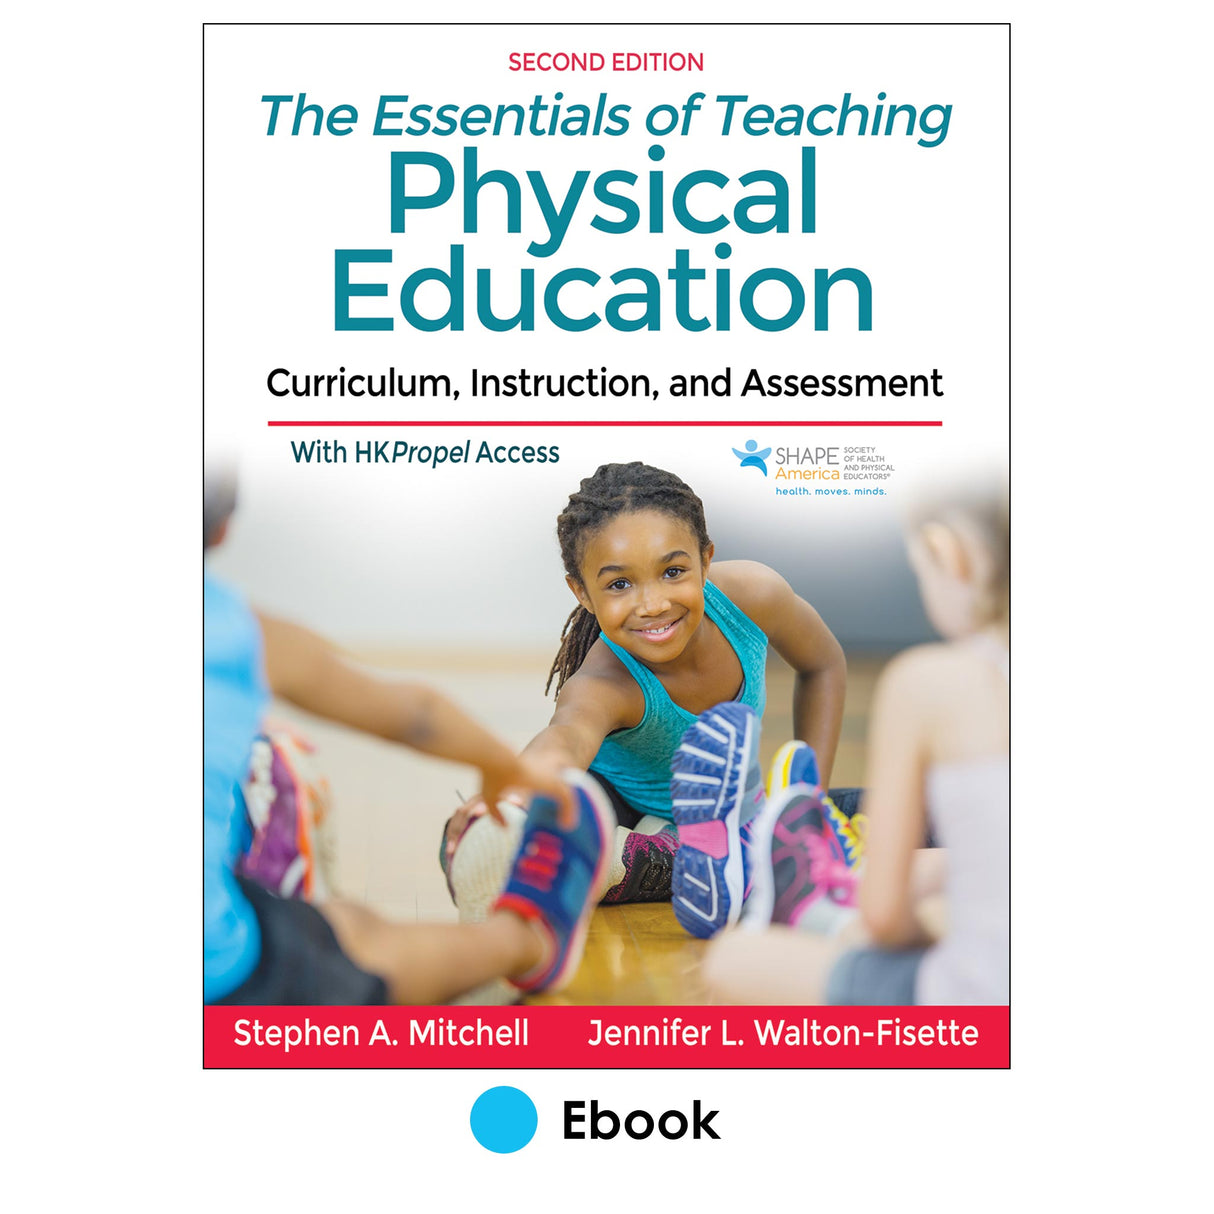 Essentials of Teaching Physical Education 2nd Edition Ebook With HKPropel Access, The